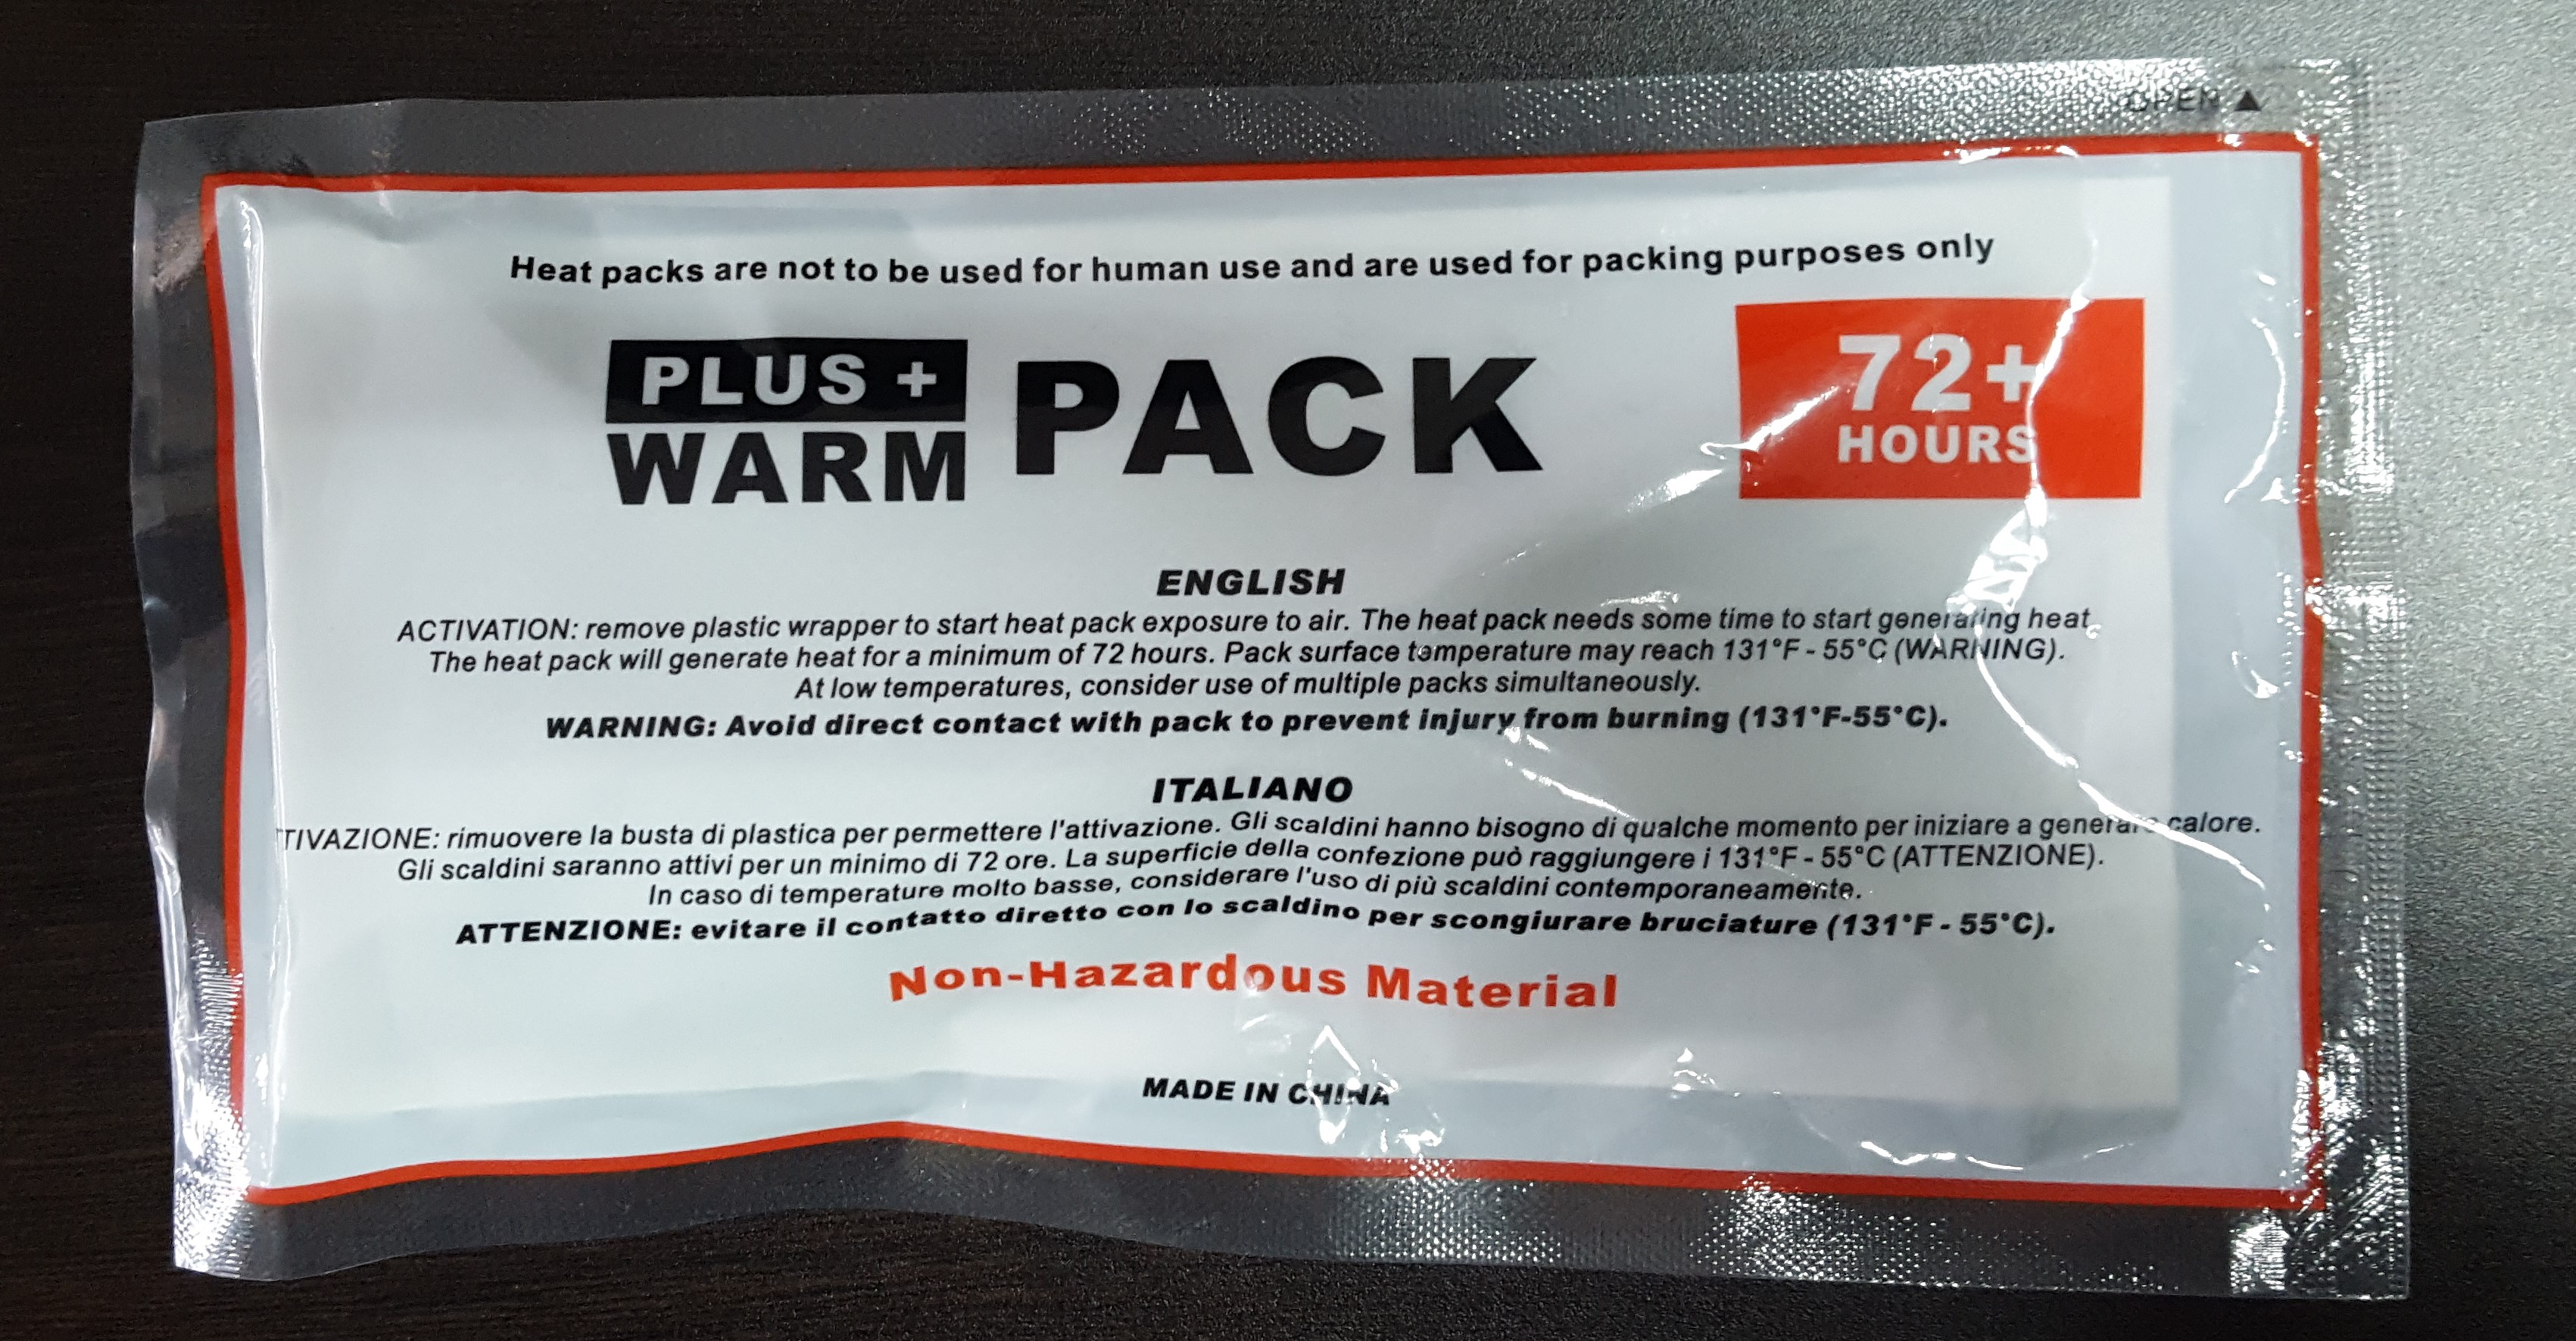 Reptile Heat Pack Can Keep Warm For 72 Hours